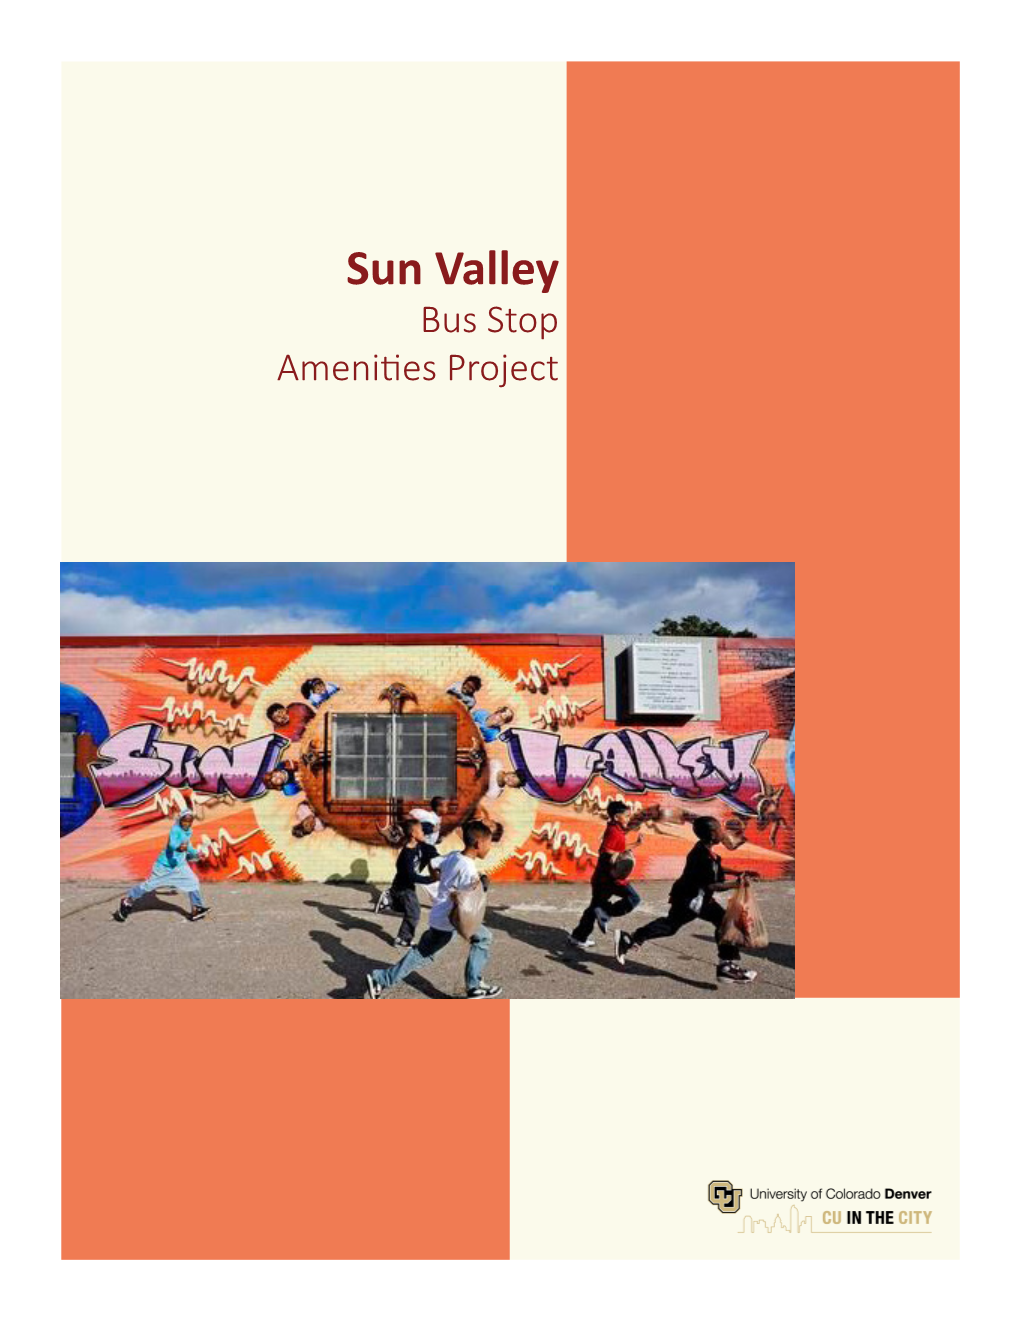 Sun Valley Bus Stop Amenities Project Credits